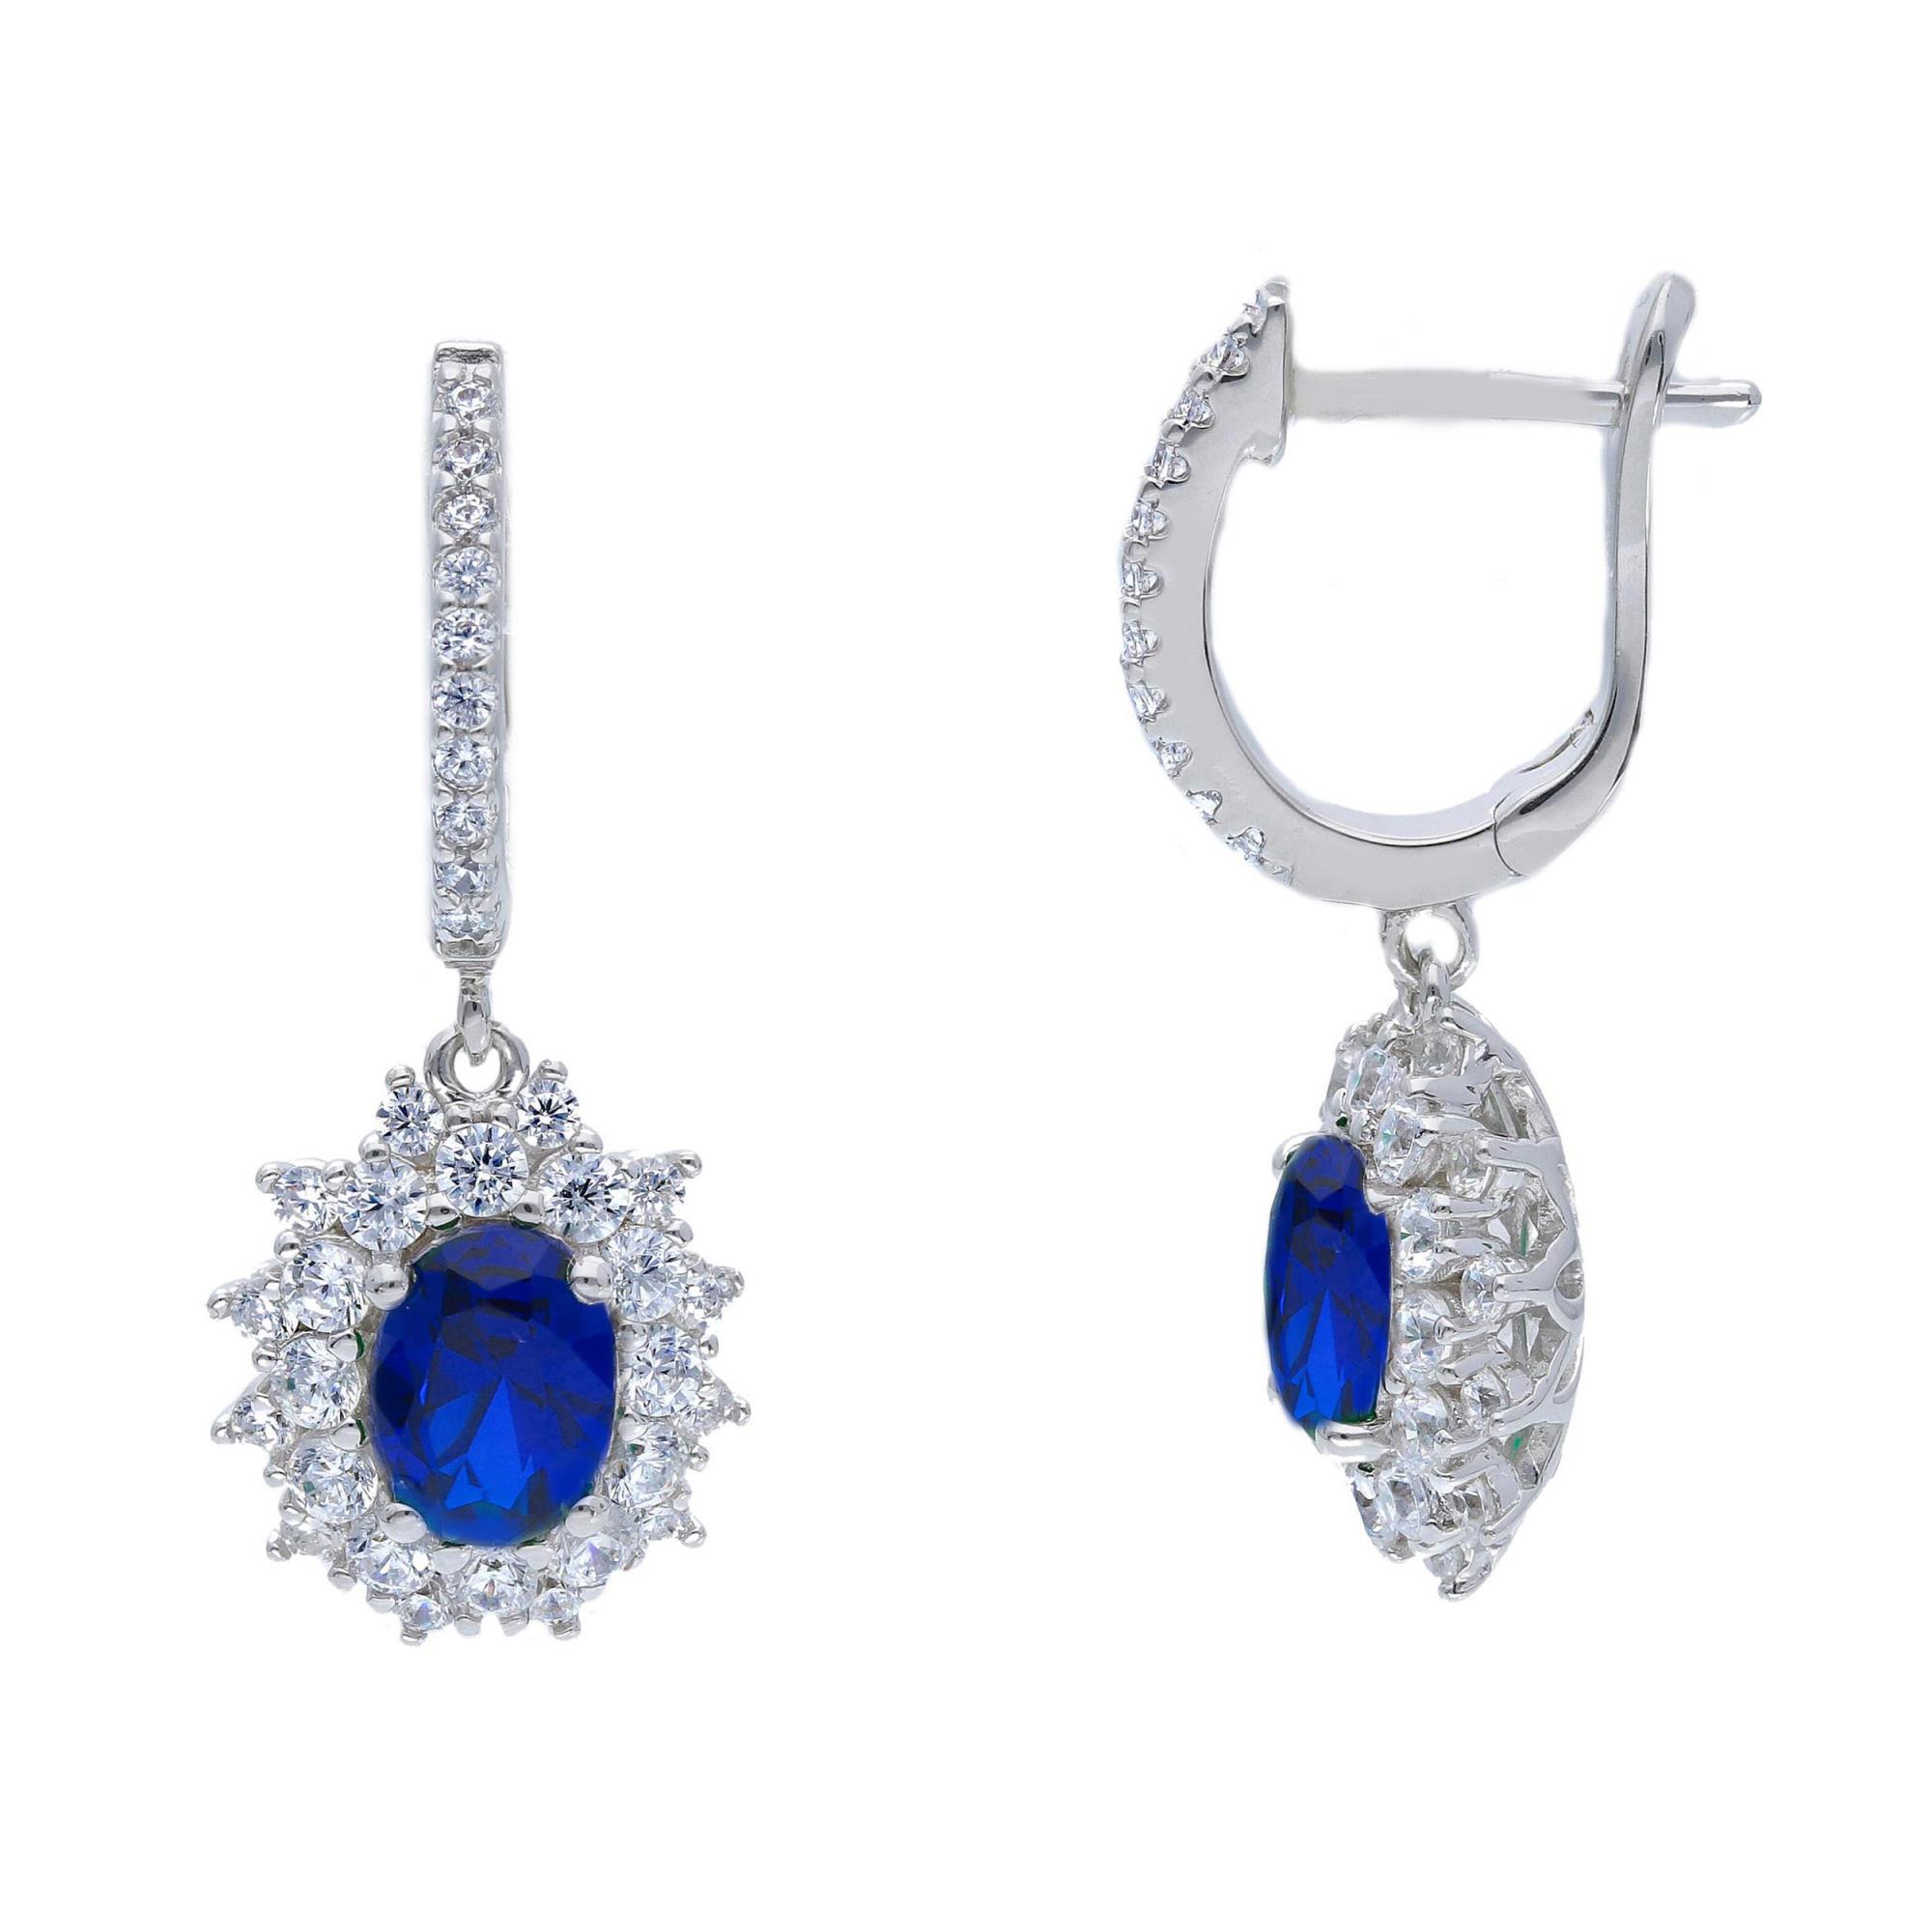 Silver pendant earrings with blue stone and zircons - ORO&CO 925